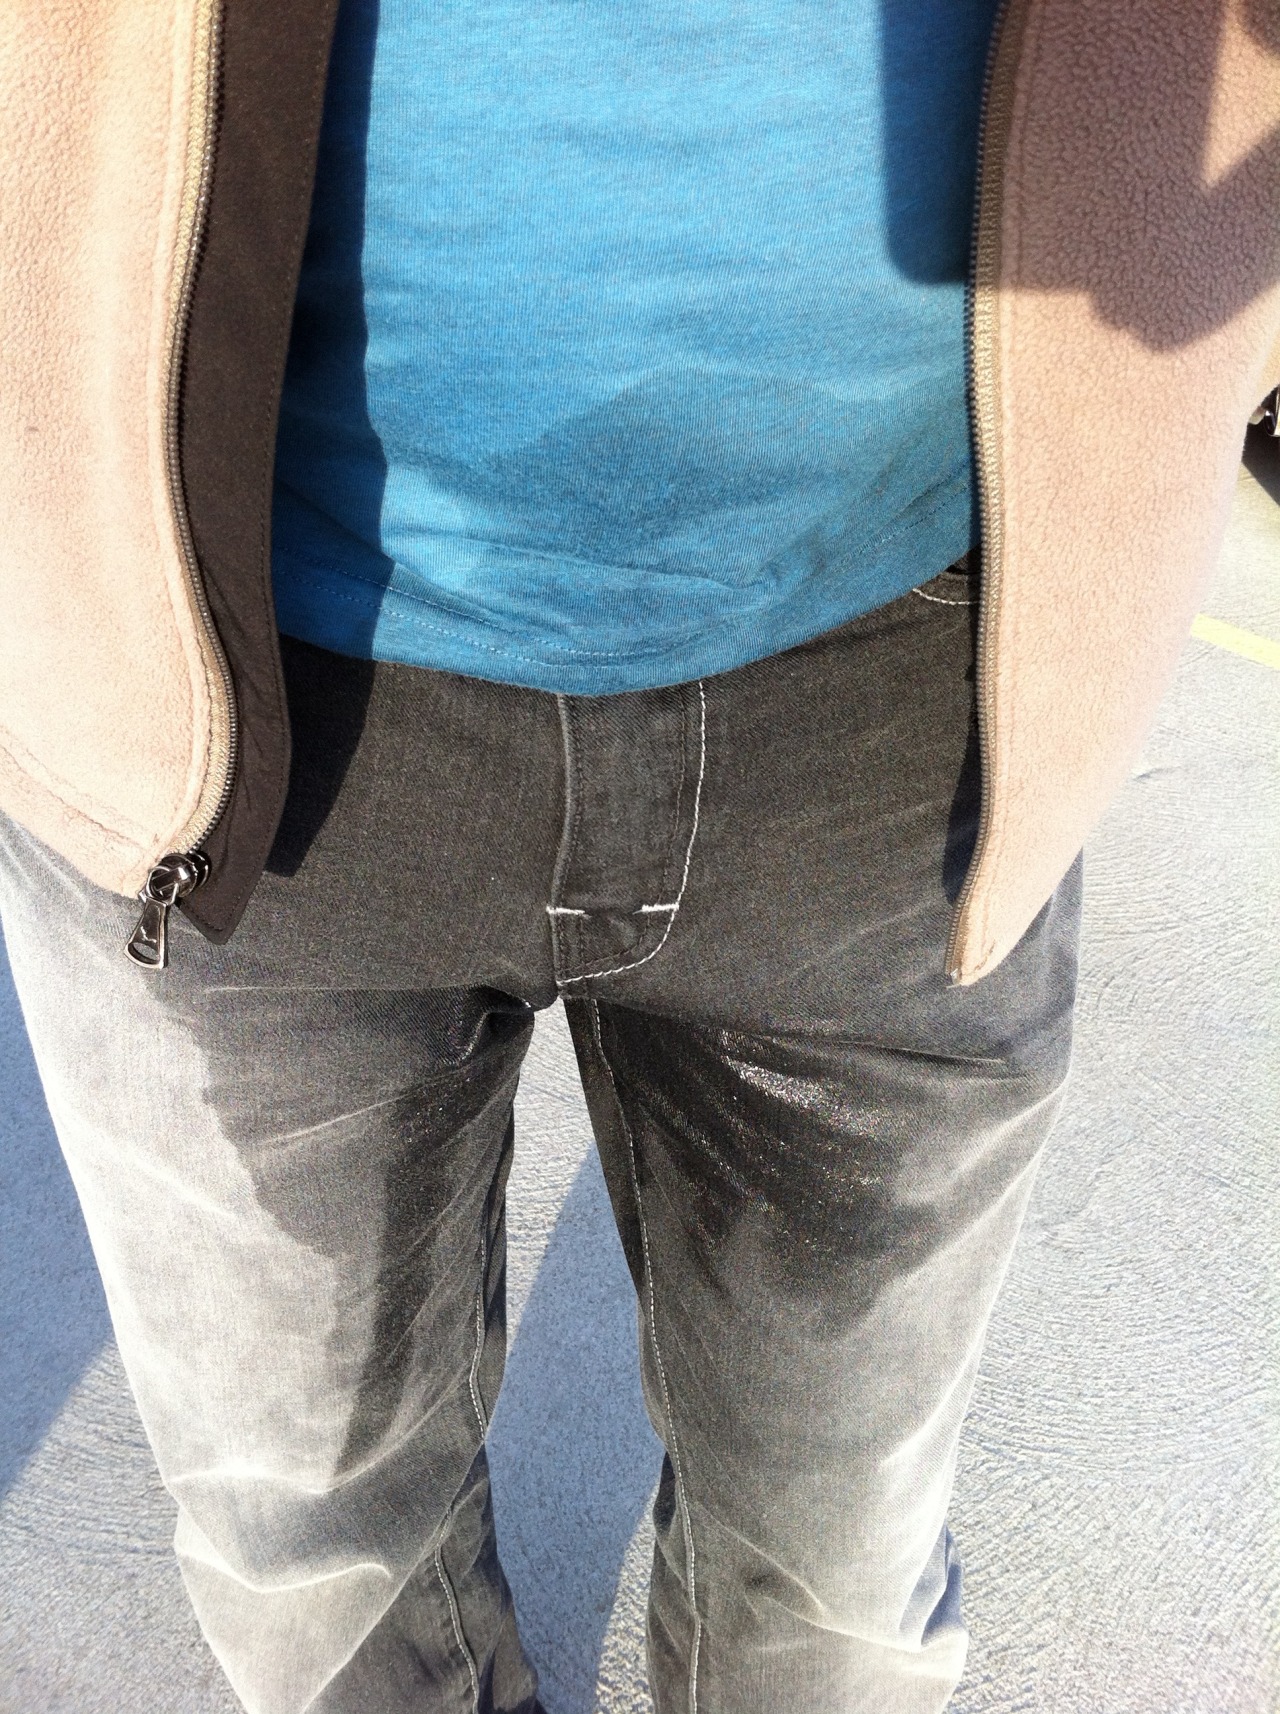 tattsandkink1:  soggypants2:  Rode the train wearing wet pants, and totally lost